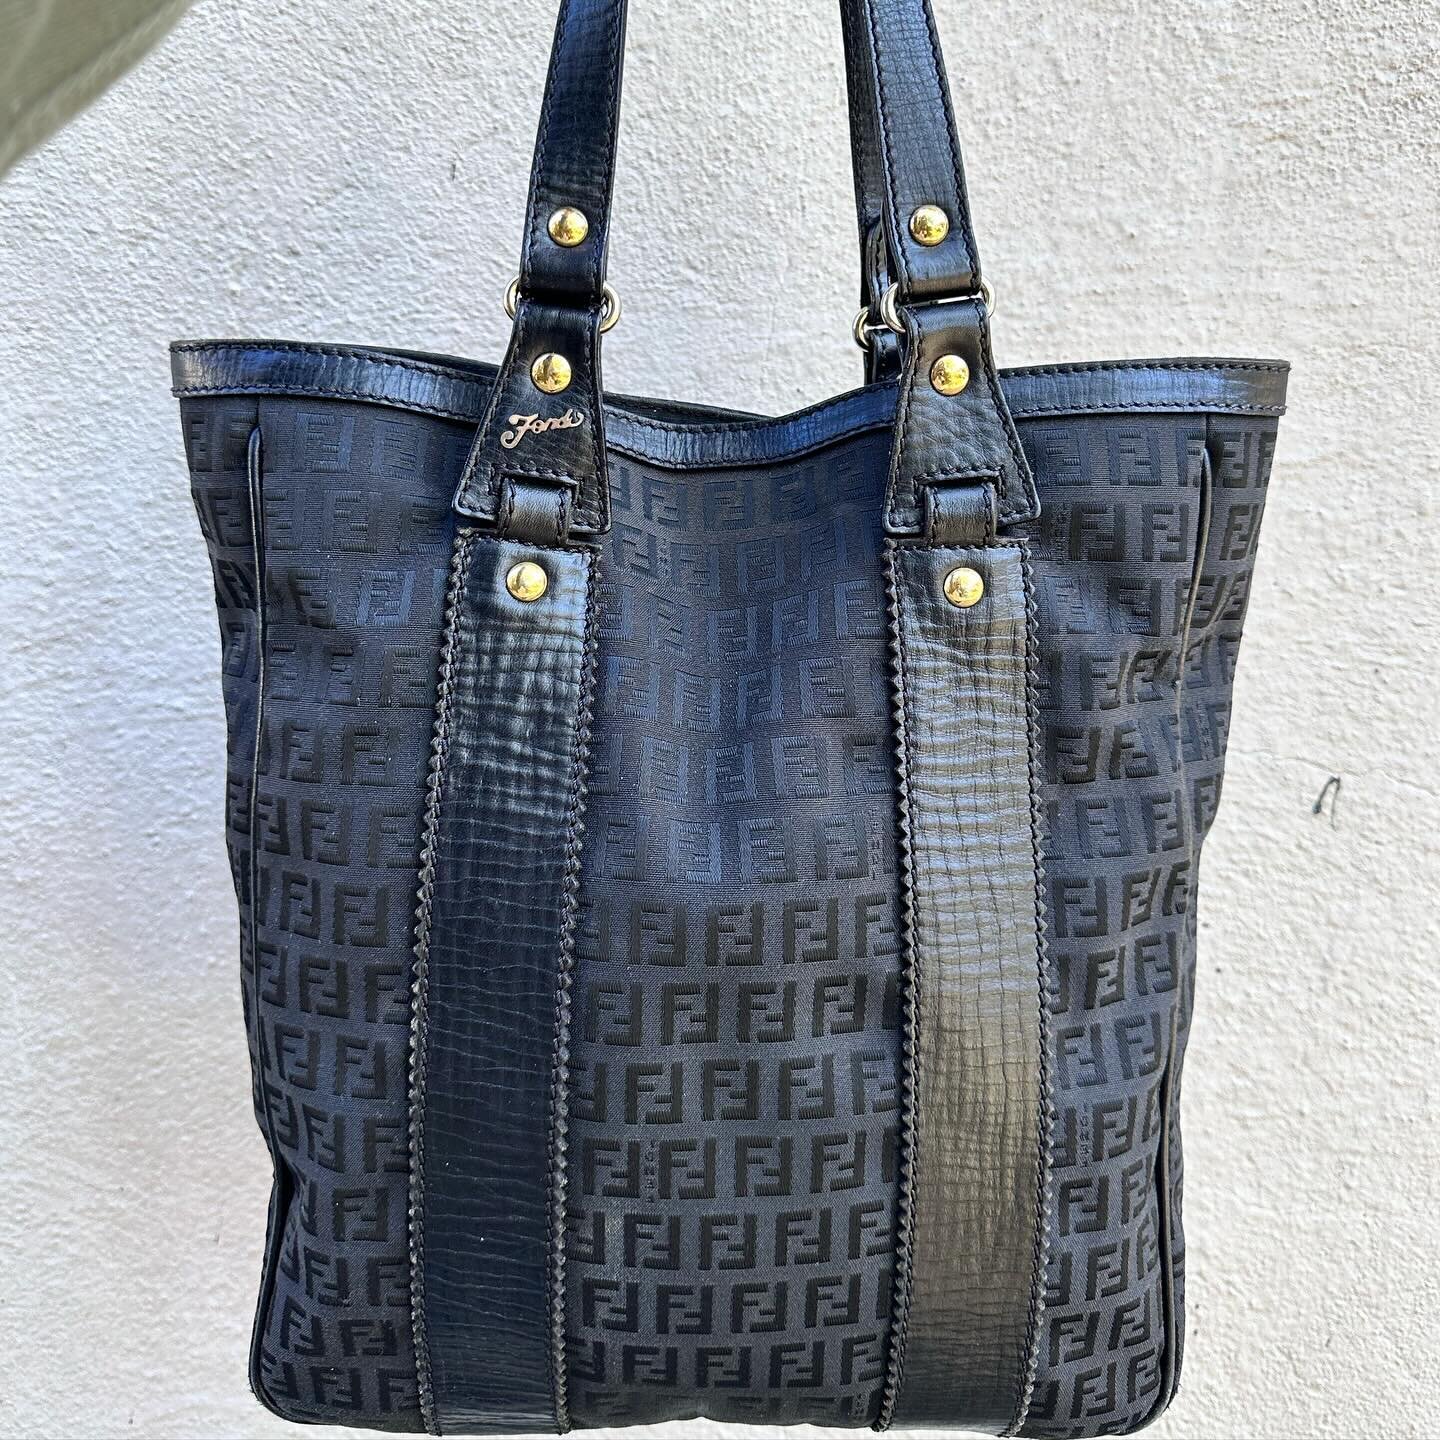 This monogram zucca satchel is waiting to be your new favorite shoulder bag🥰👜 

Available for $725.95 
&bull;
&bull;
&bull; 
For inquiries call or email us! 
📞 609-924-1997
📧 princeton@greenestreet.com

@greenestreetprinceton is not affiliated wi